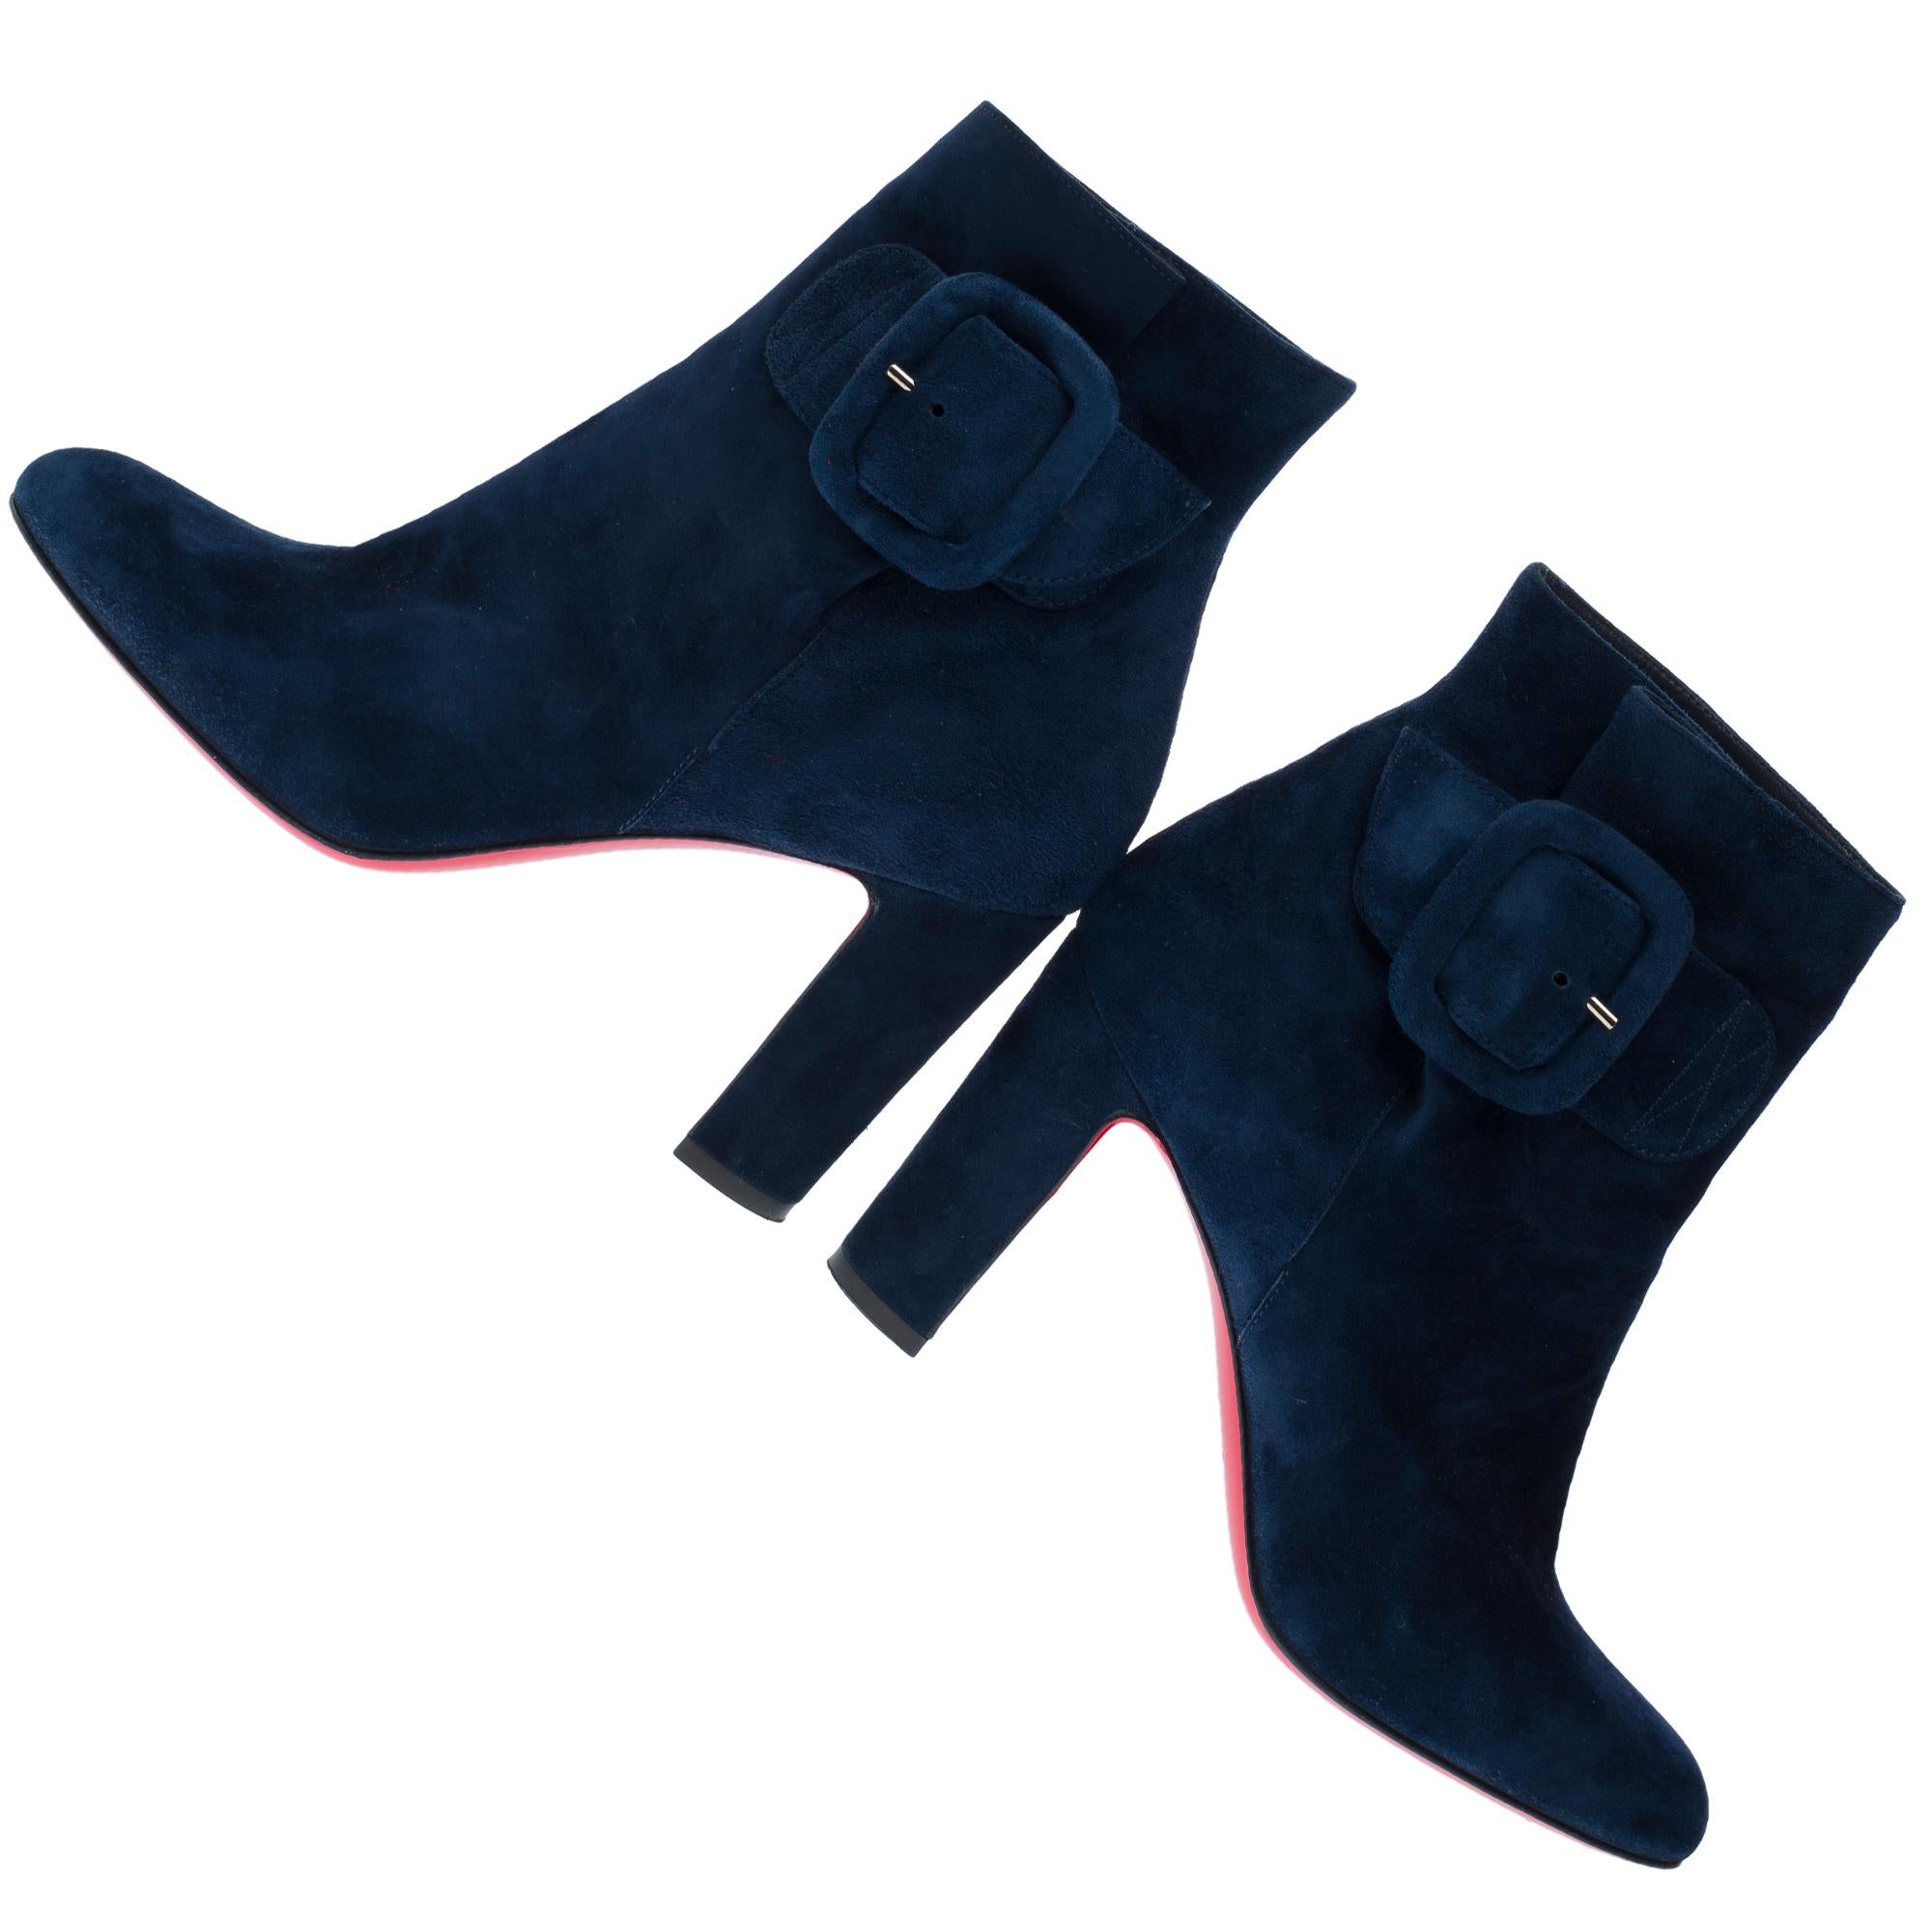 Christian Louboutin ankleboot in blue suede, size 37 For Sale 5